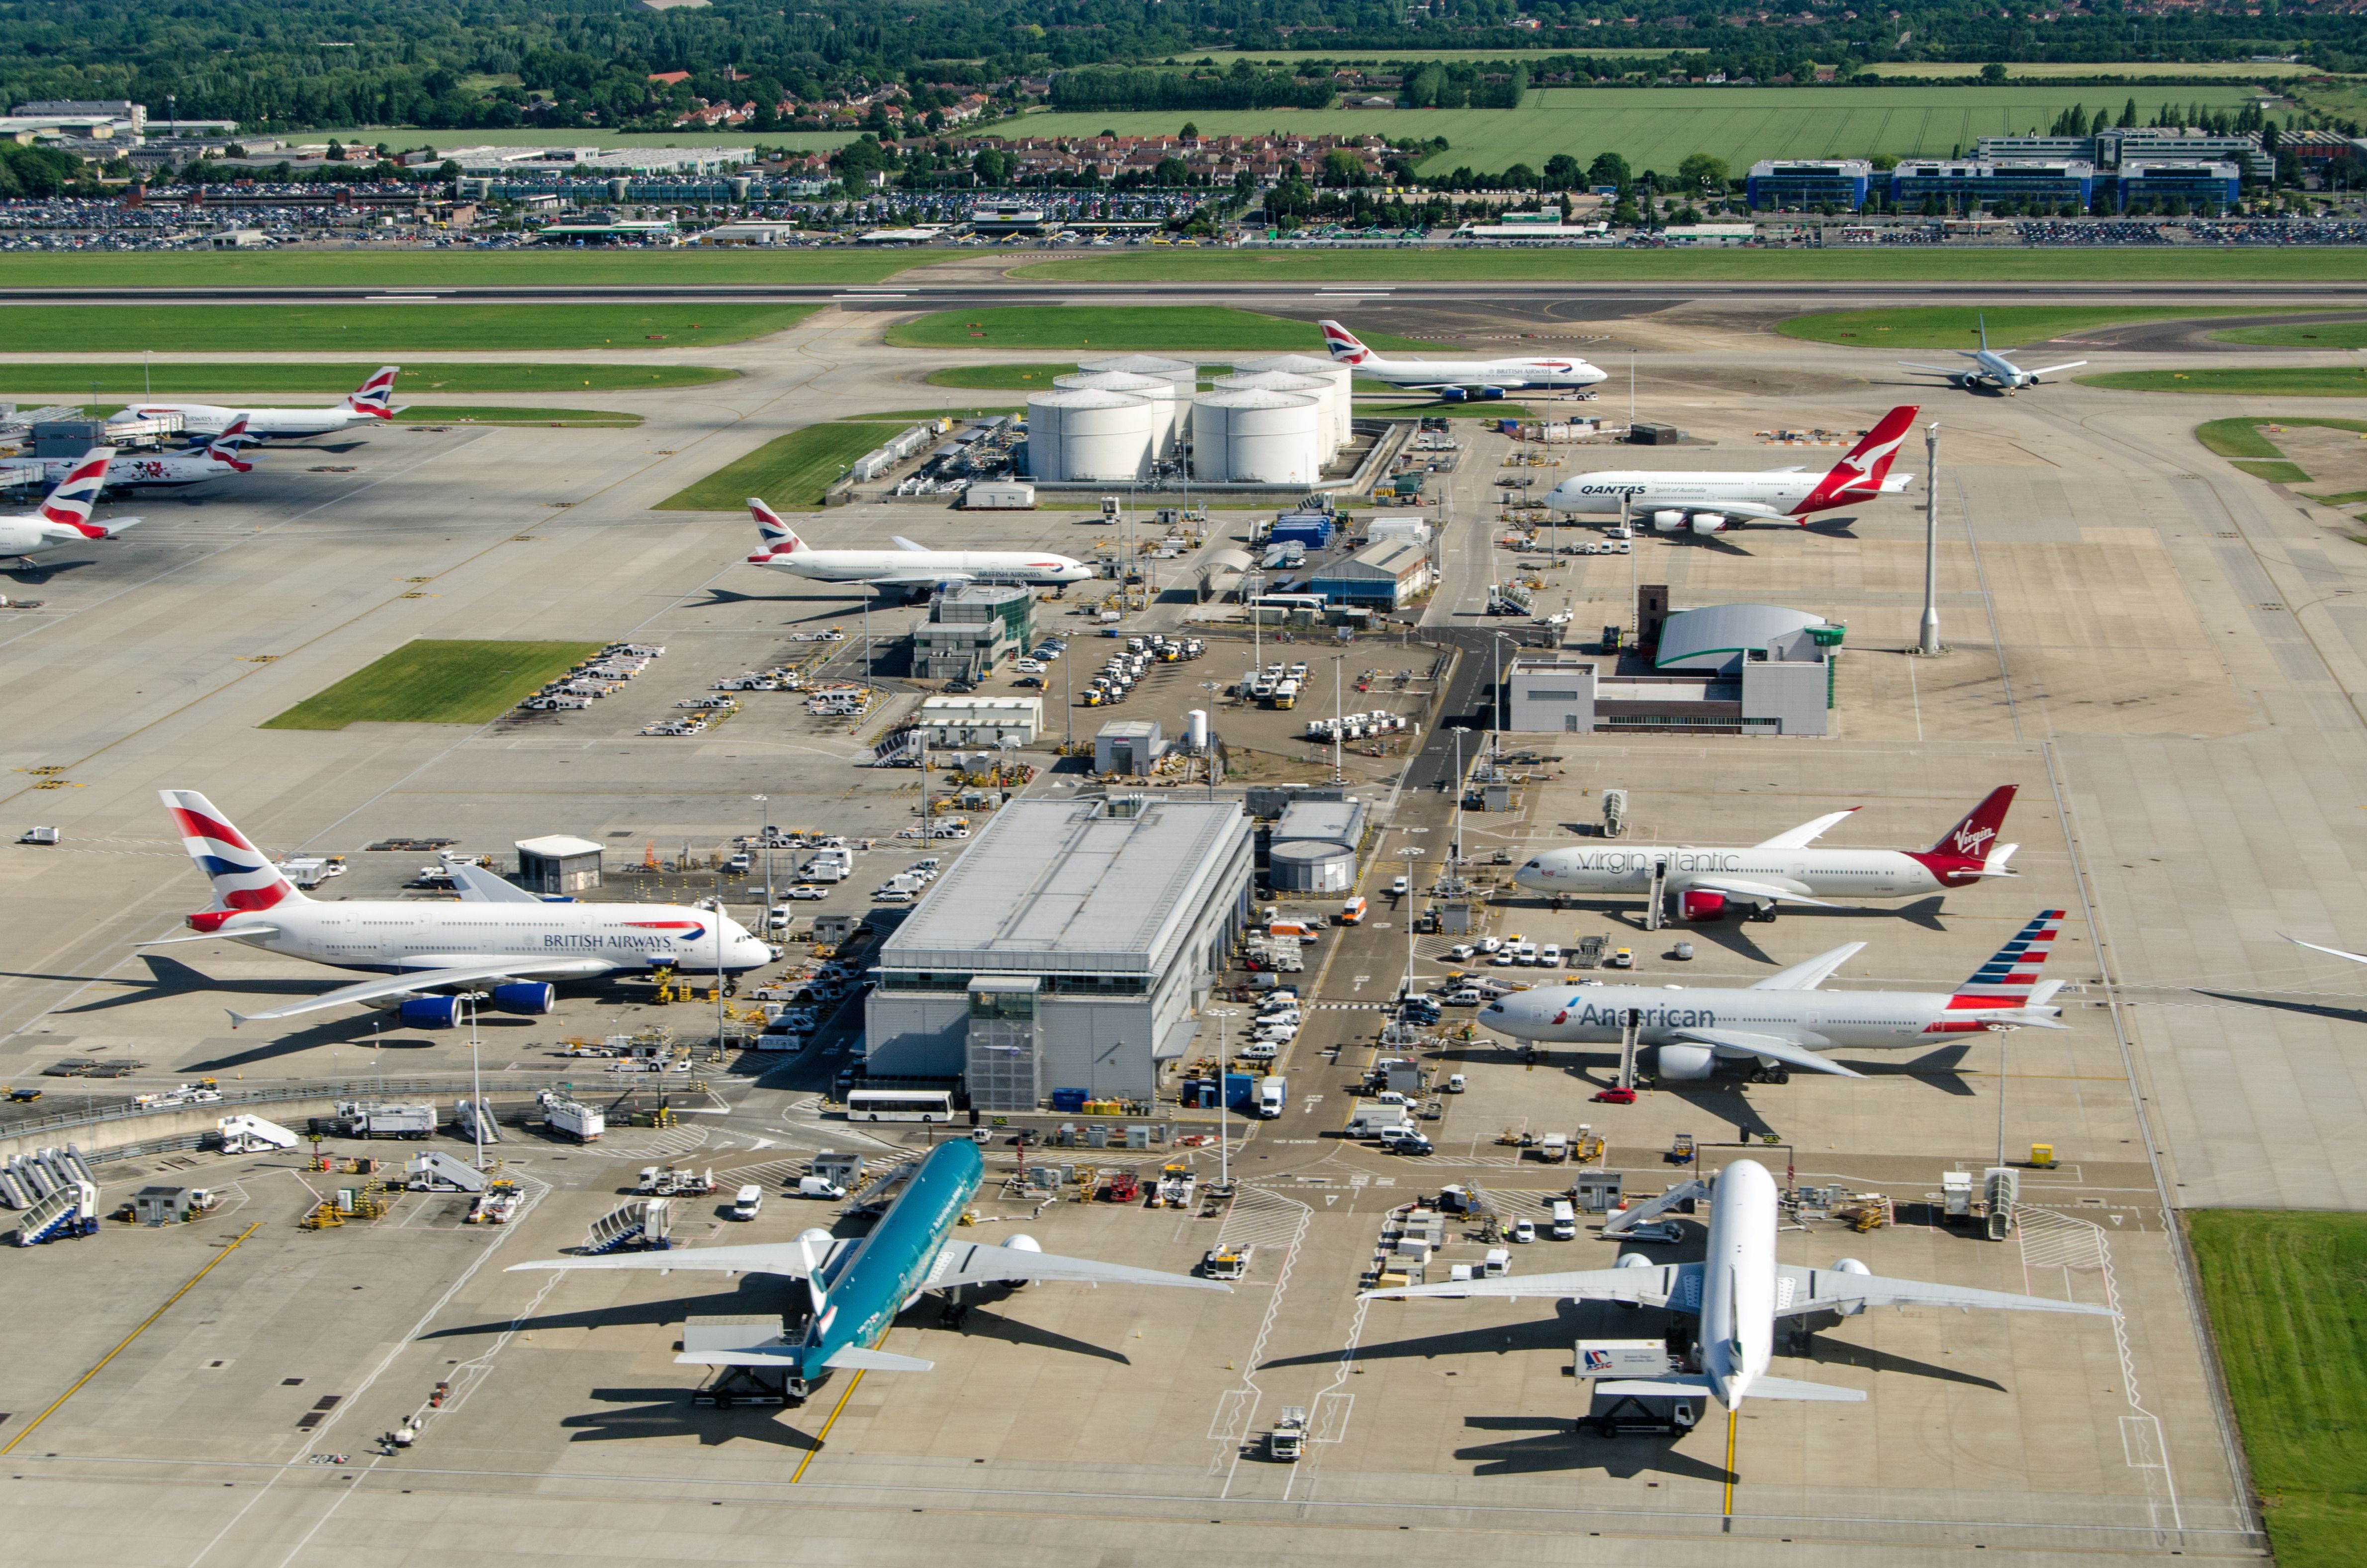 Several aircraft from many different carriers on the apron at London Heathrow airport.